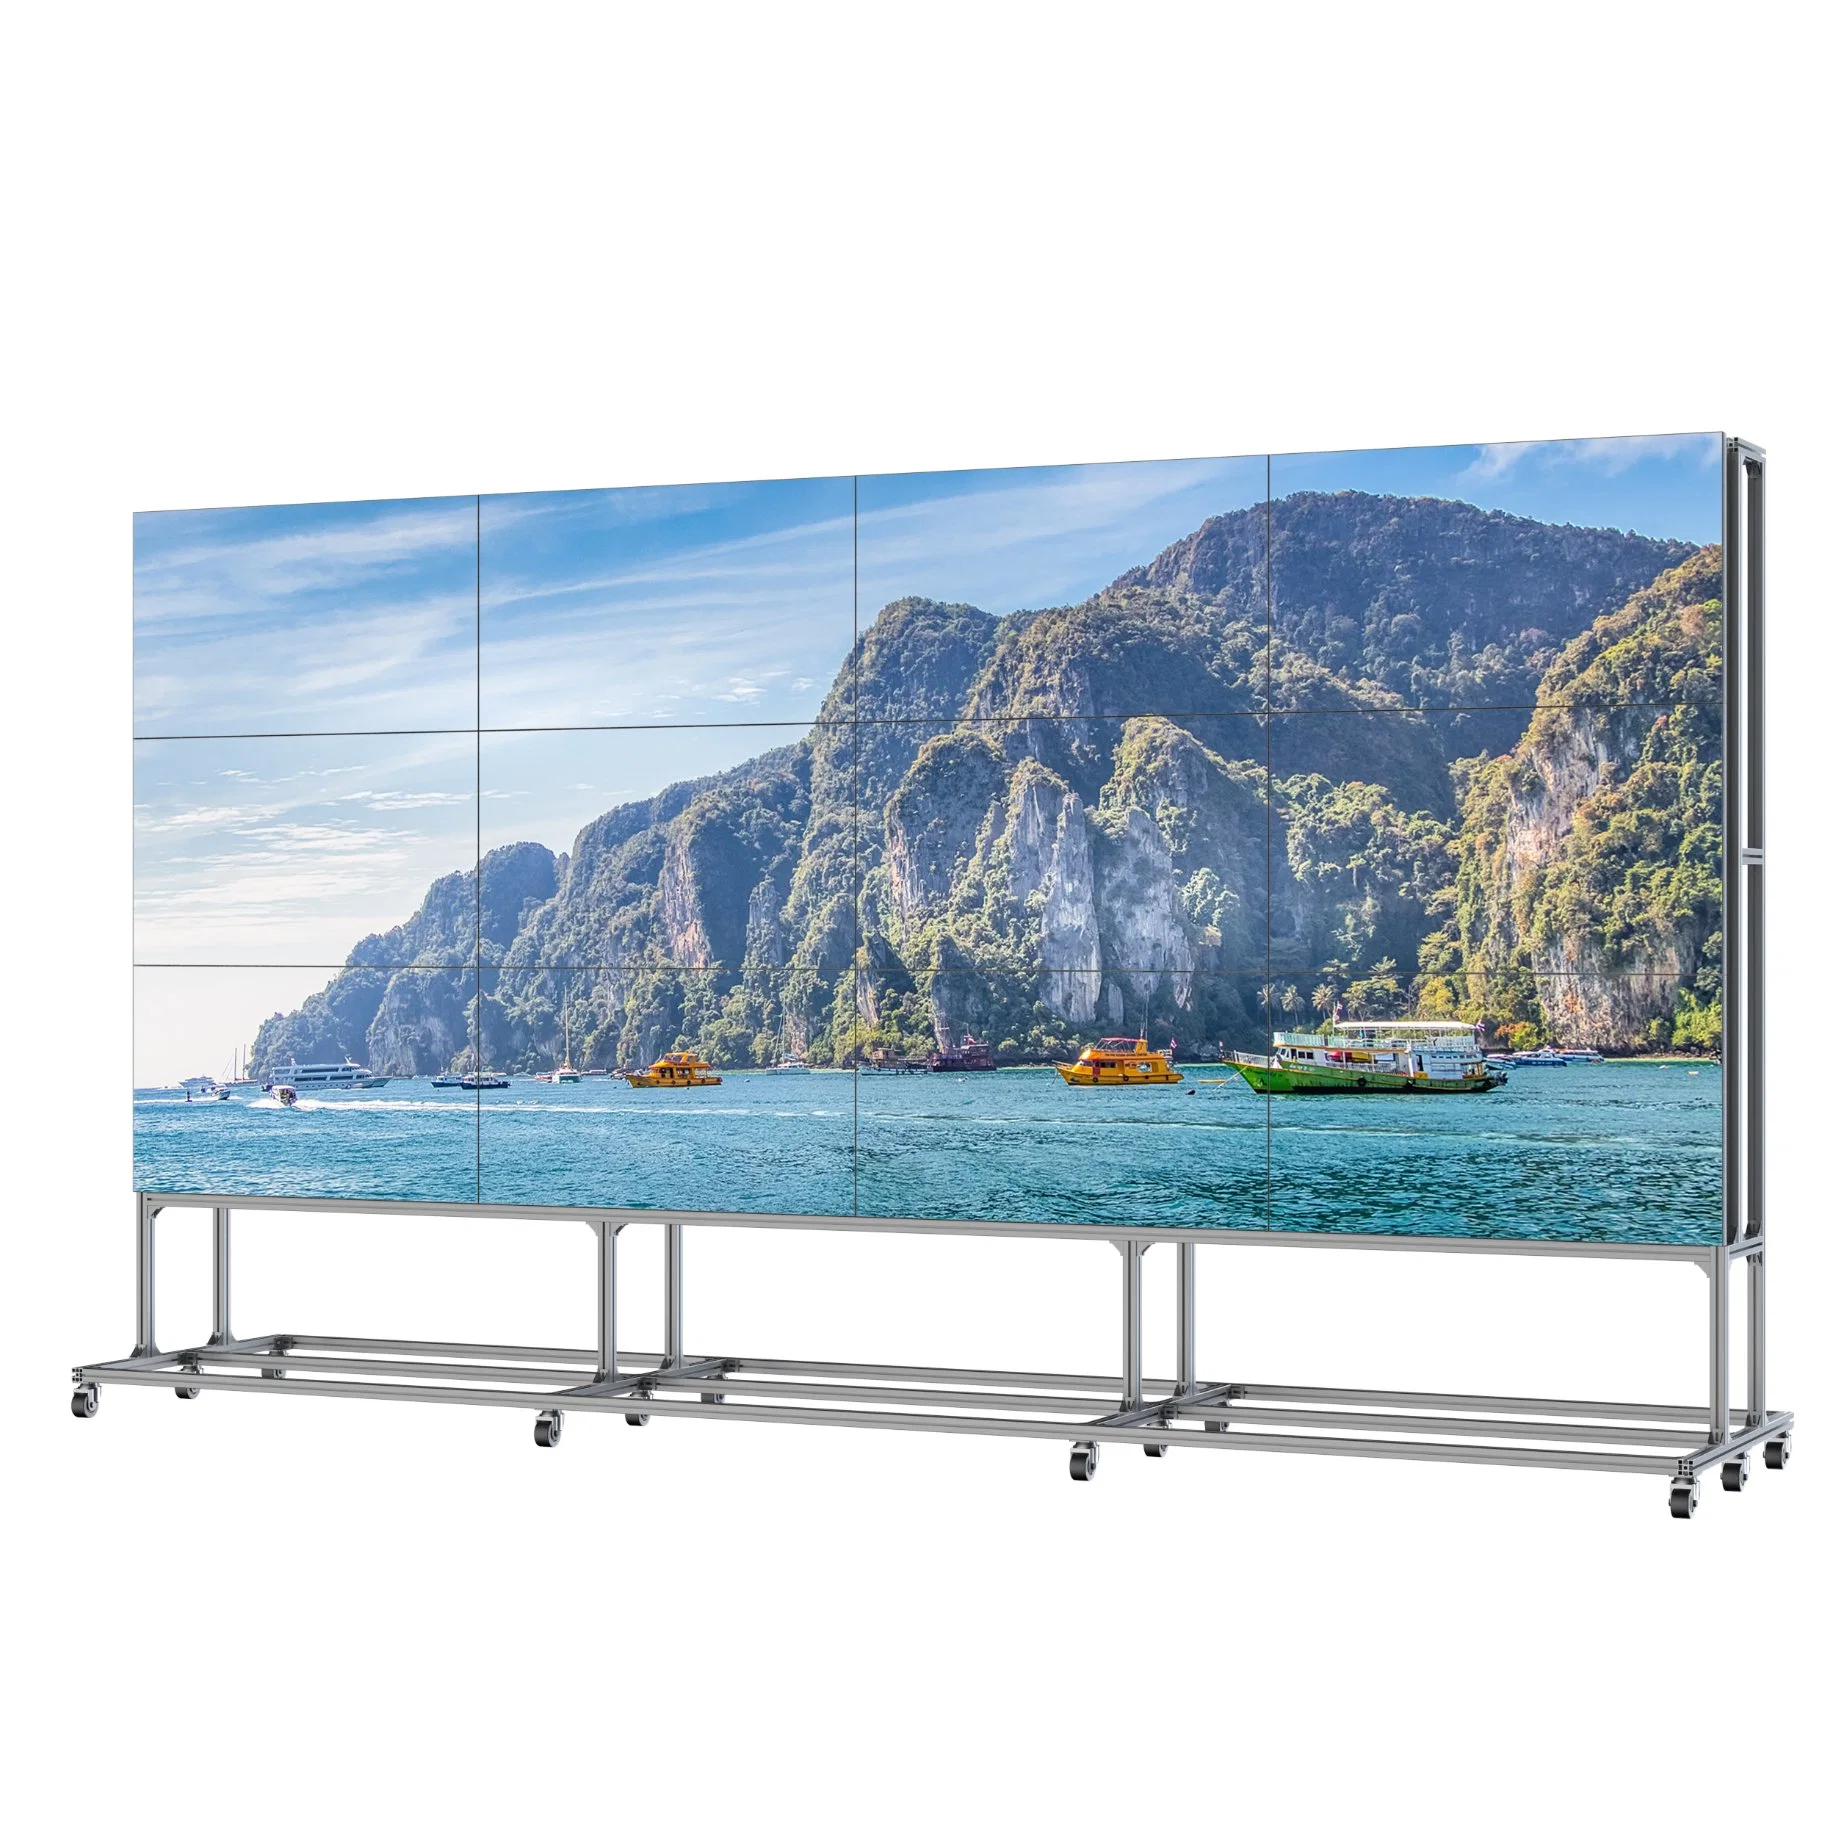 Advertising Player Ultra Thin Bezel LCD Video Wall 46 Inch Video Advertising Full Xx Player Android Tablet Adobe Flash Player Download Wall Mount LCD Display